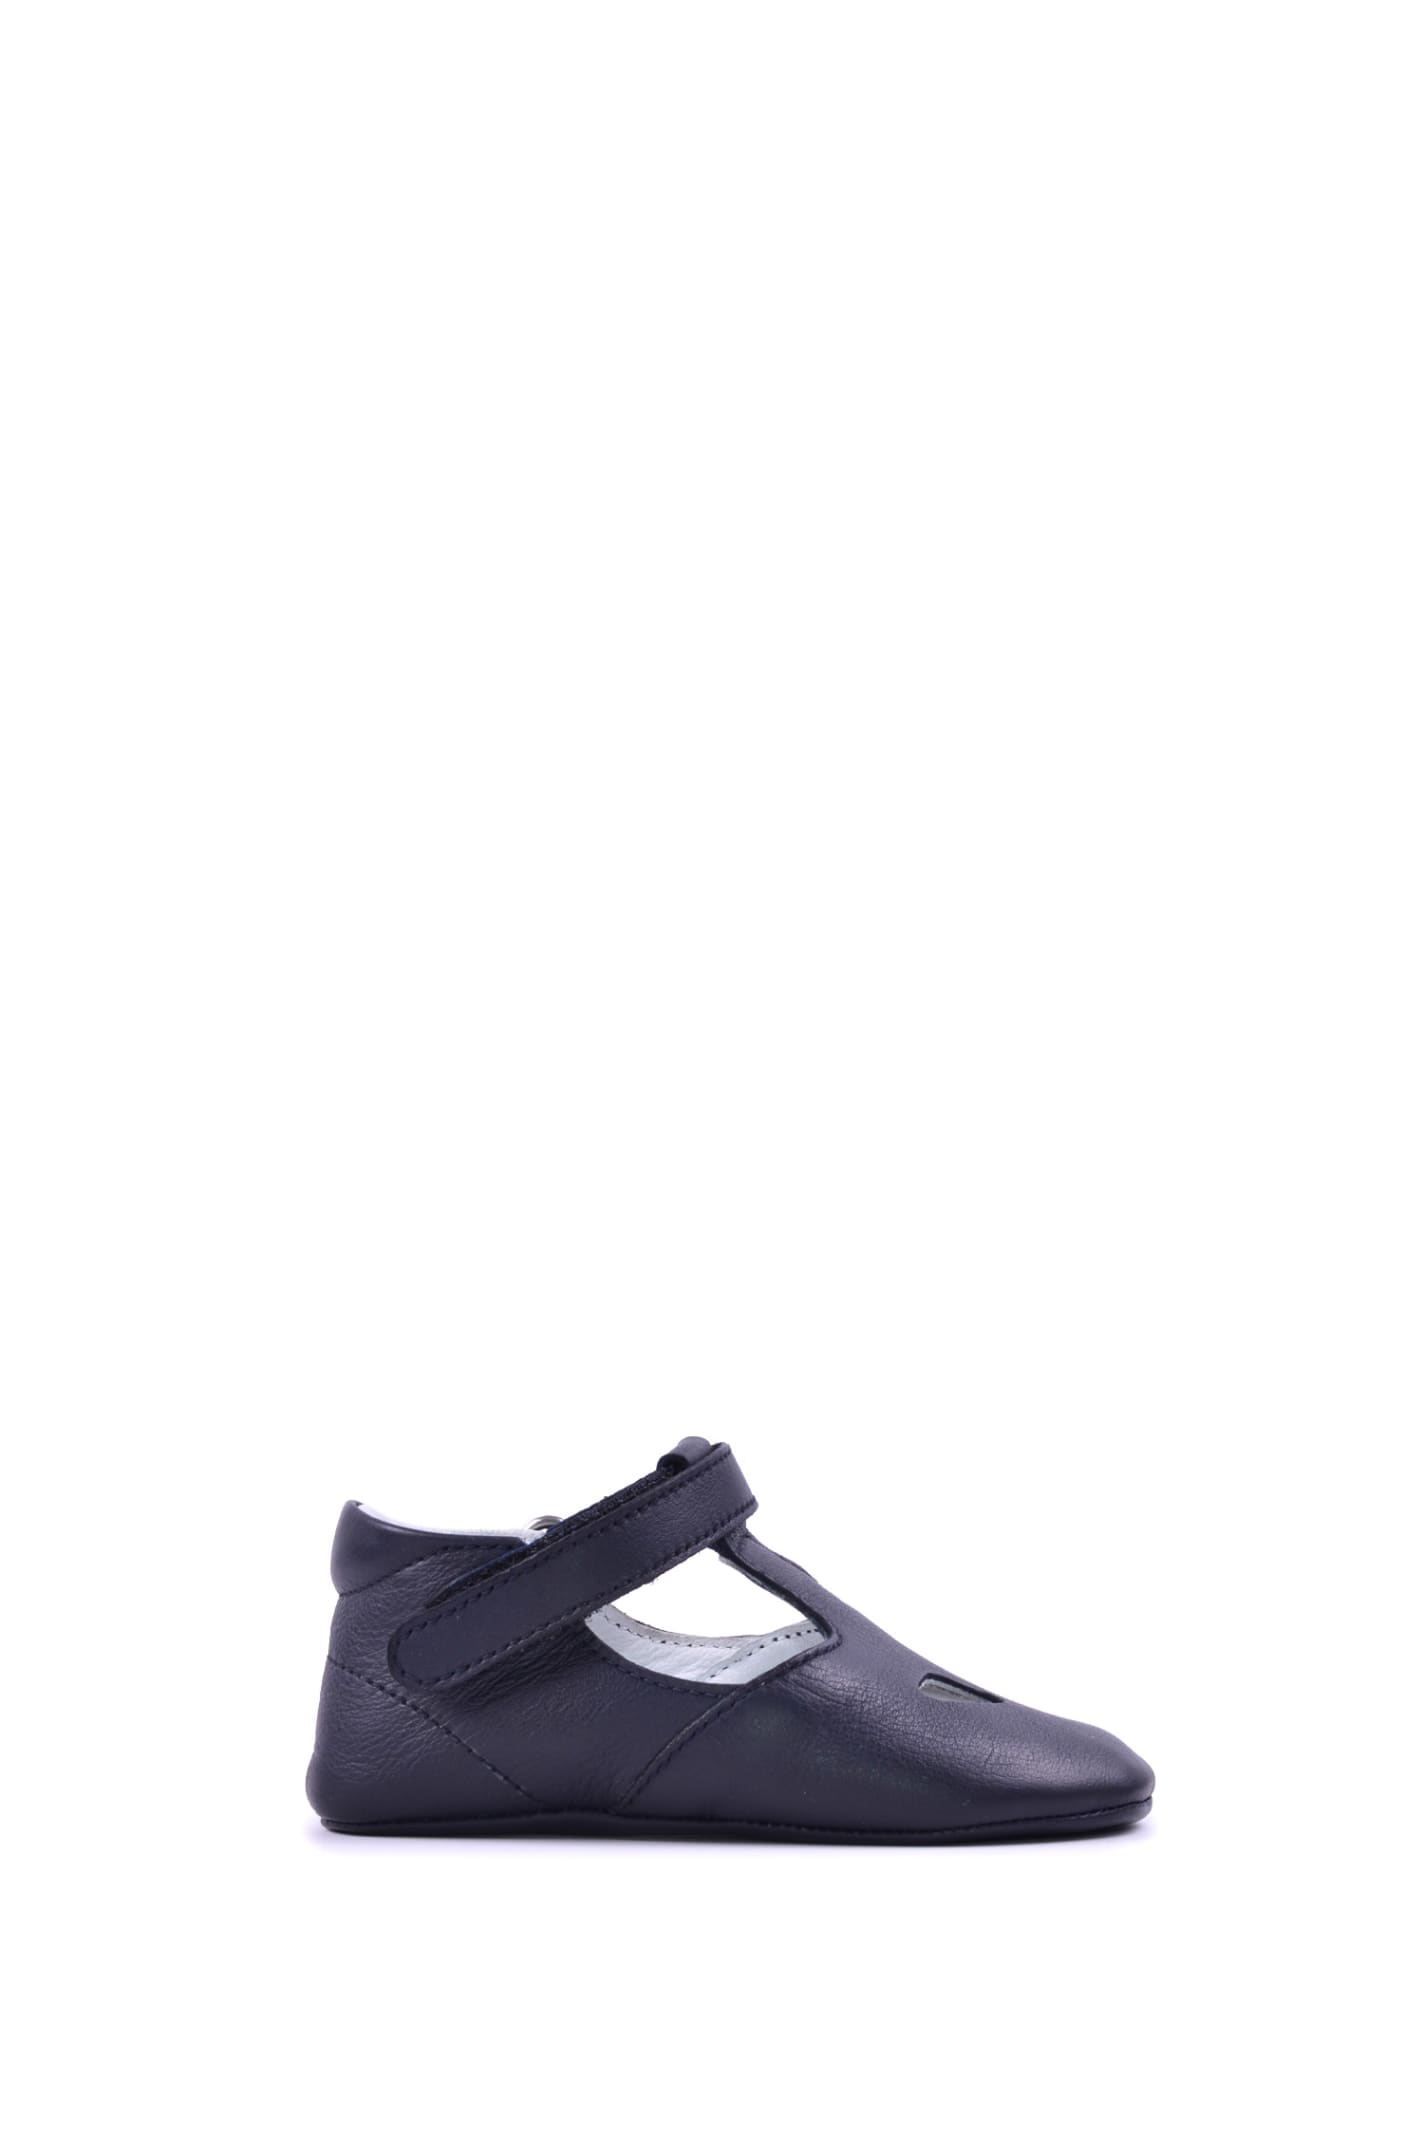 Gallucci Kids' Leather Shoes With Buckle In Blue